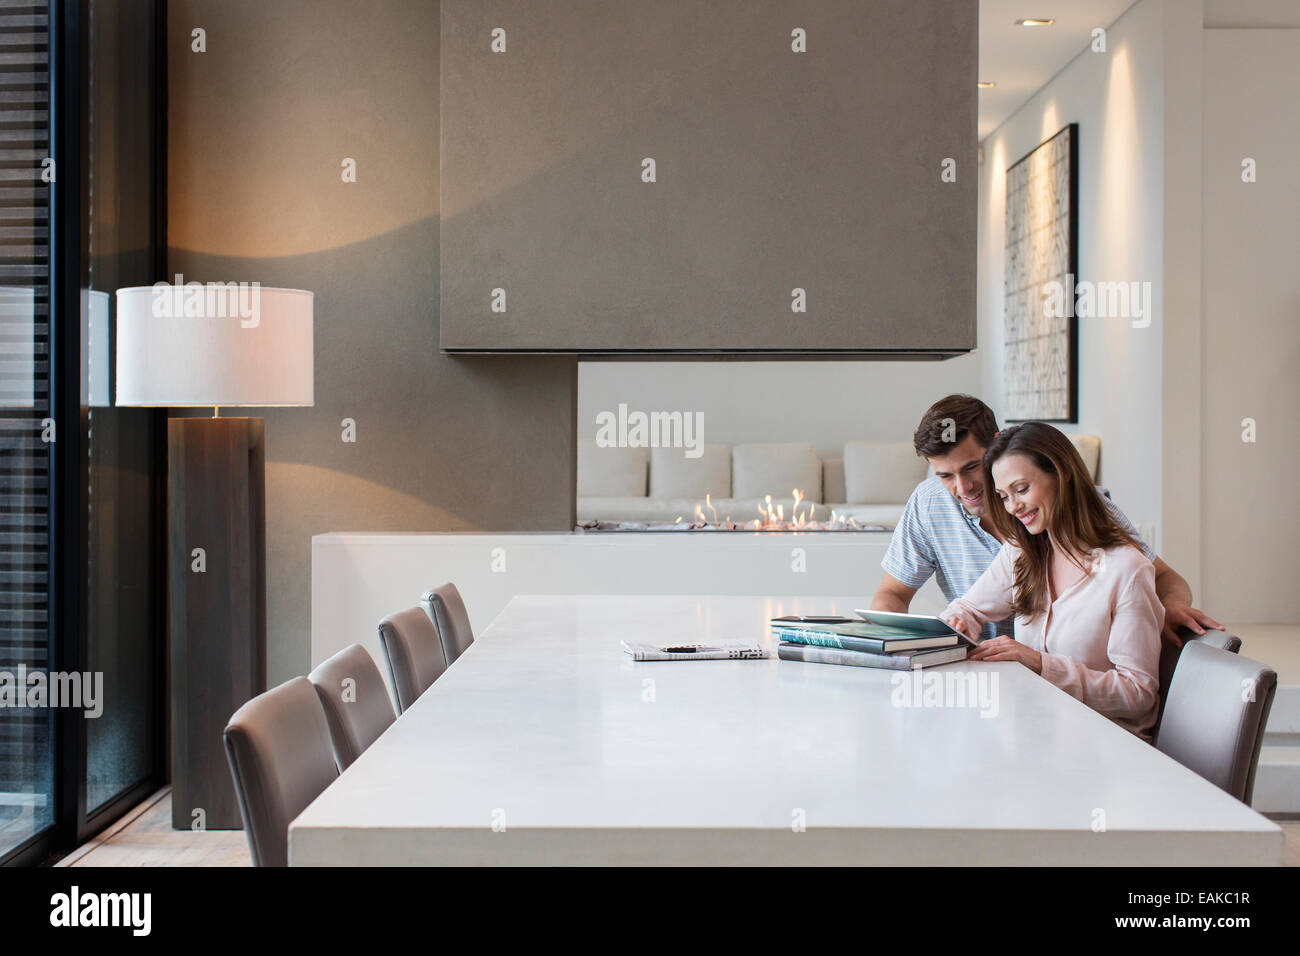 Couple using tablet pc in dining room Stock Photo